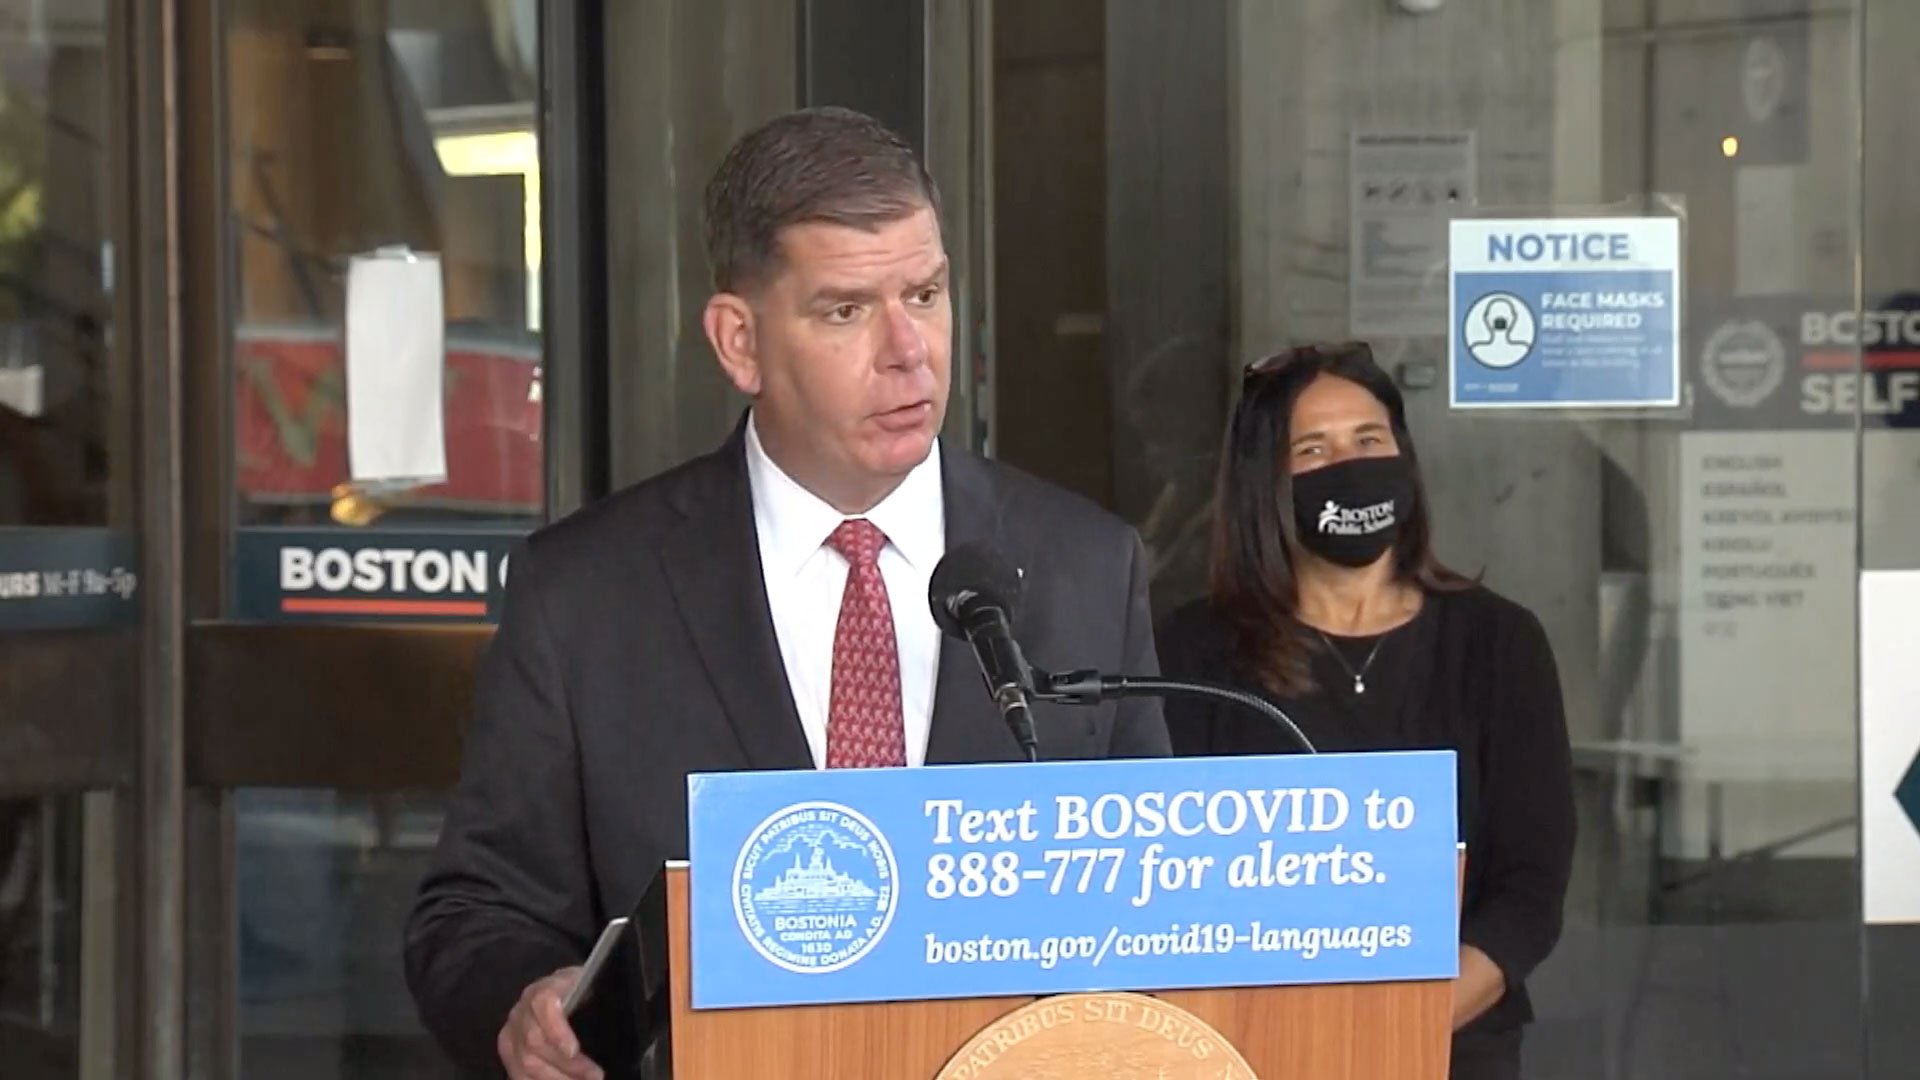 Mayor Marty Walsh speaks at a press conference in Boston on October 7.